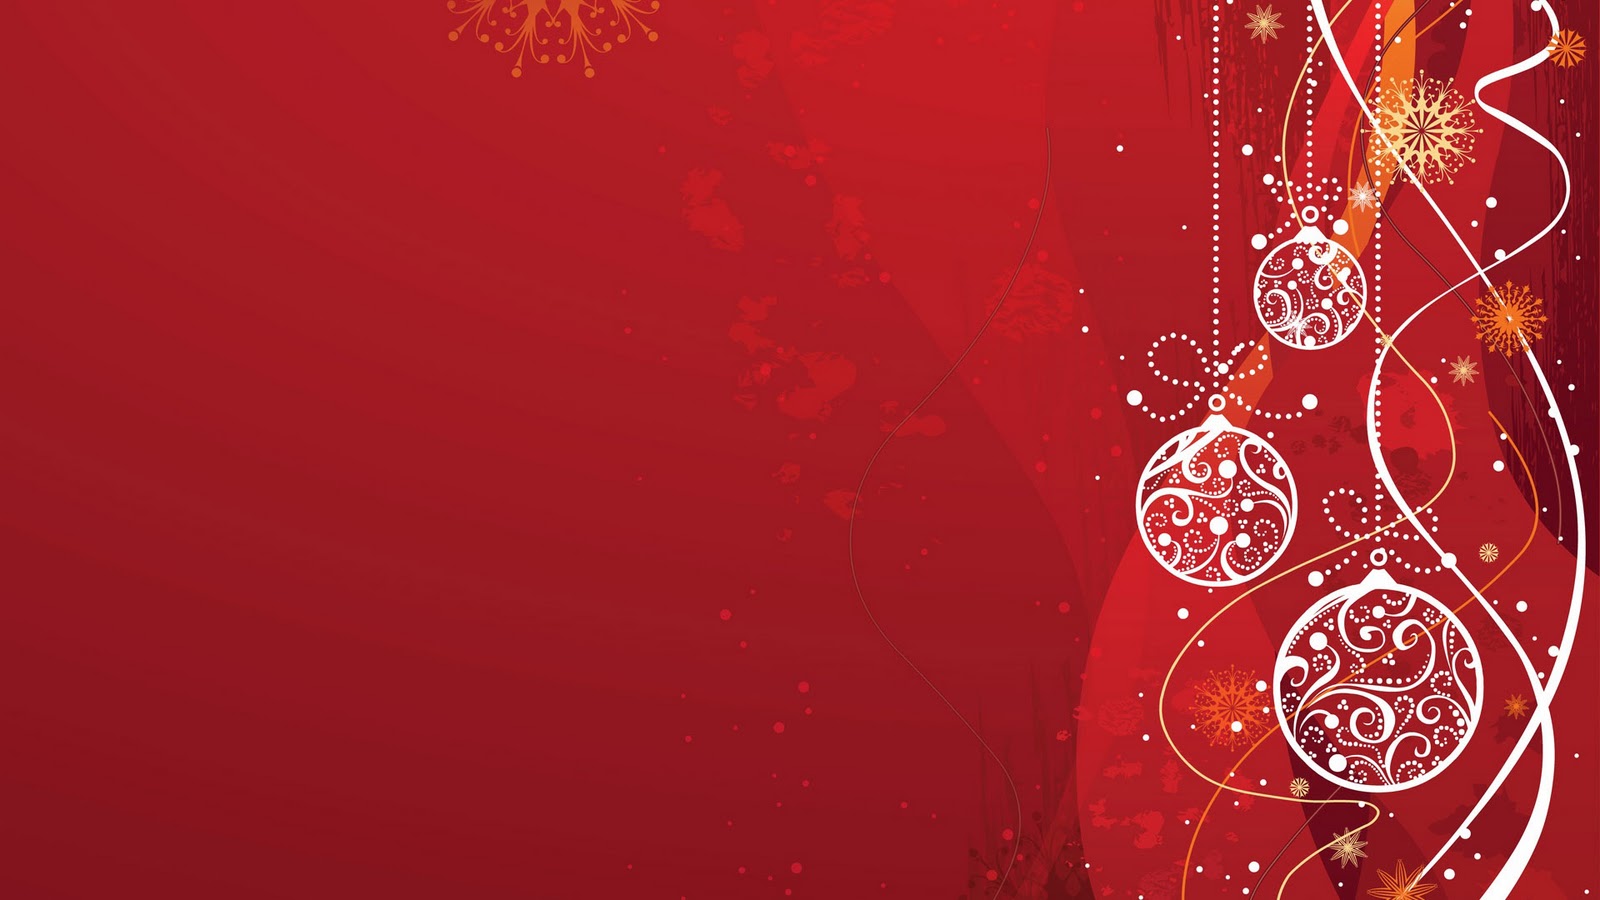 Christmas Backgrounds HD Wallpapers9